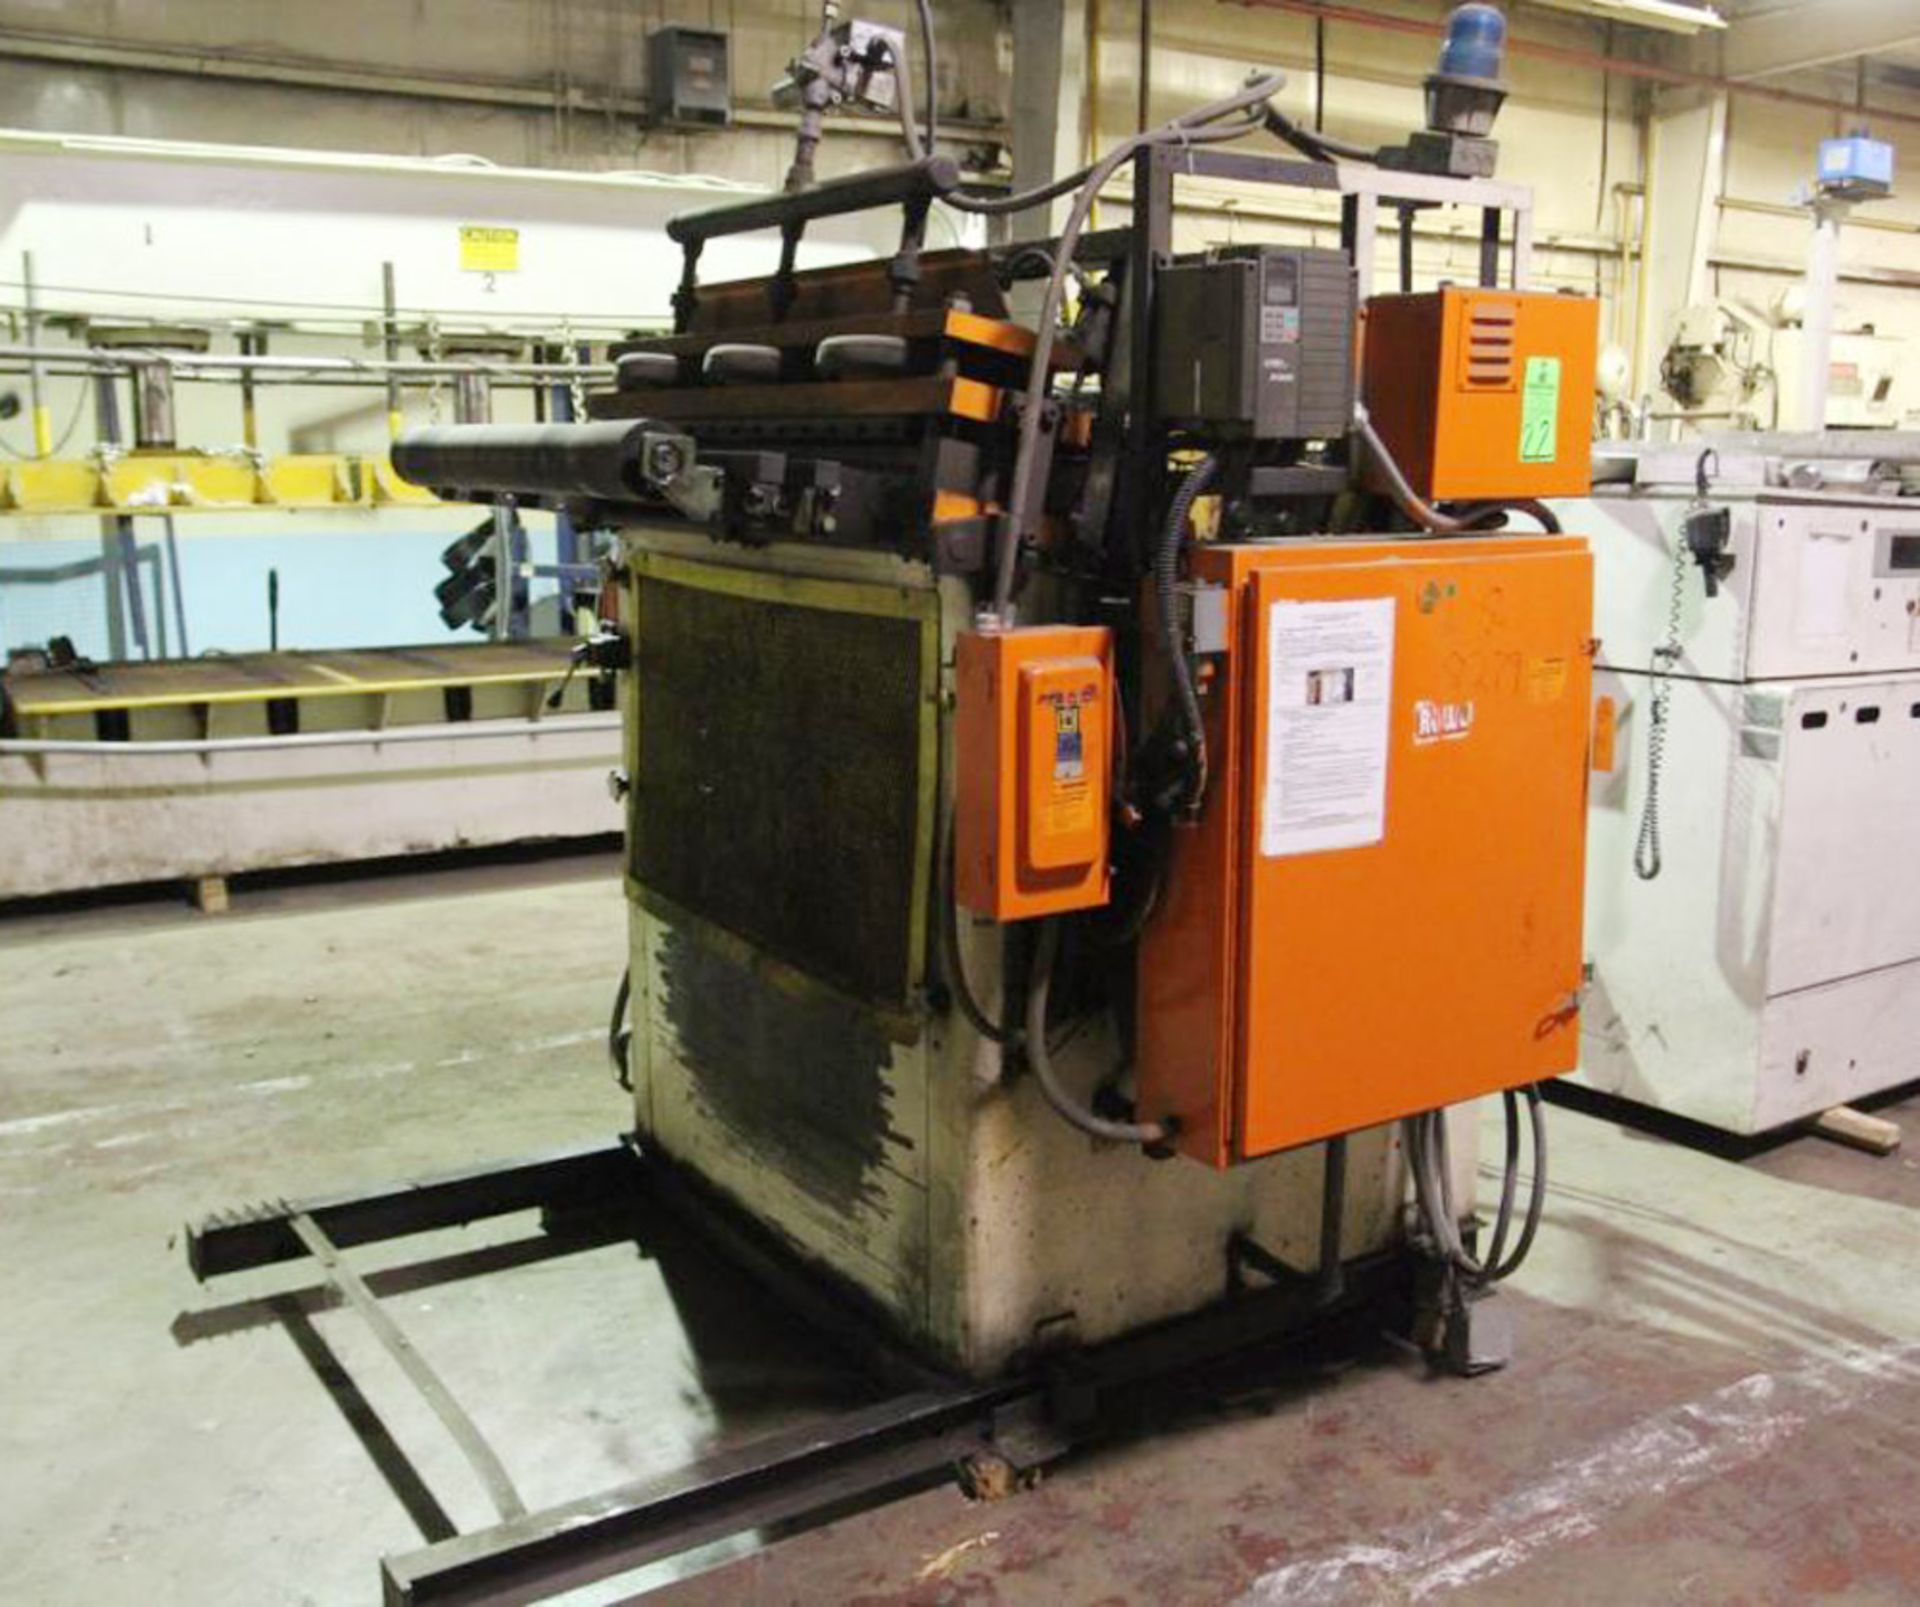 FREE LOADING - Located In: Painesville, OH - Rowe Coil Straightener, 40" x 0.110", Mdl: C3-40, S/